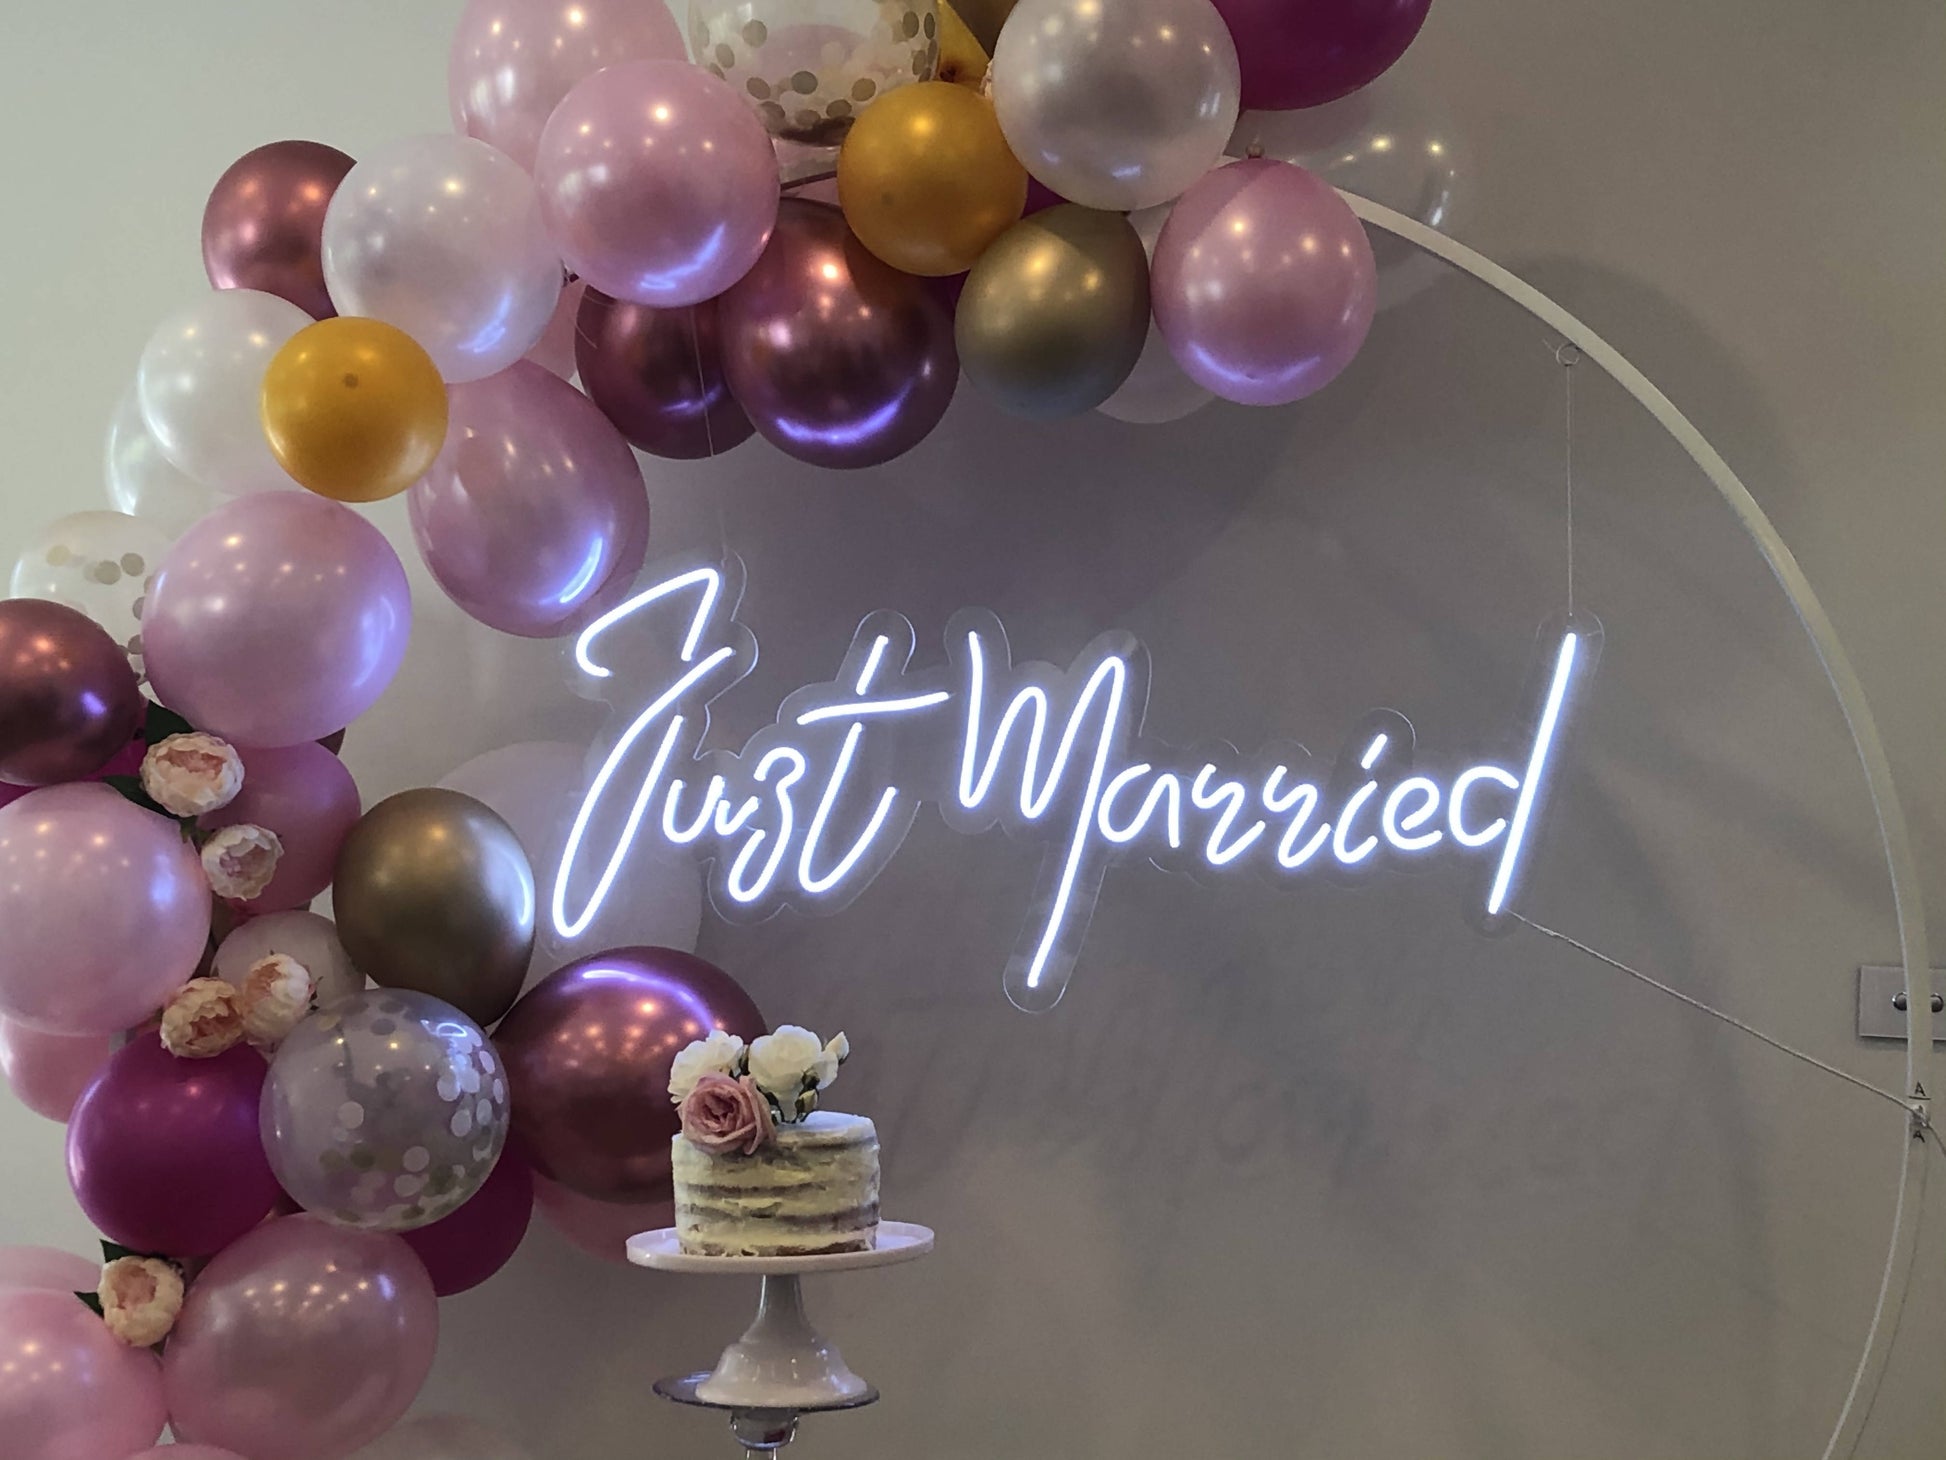 JUST MARRIED NEON HIRE - Live Shopping Tours